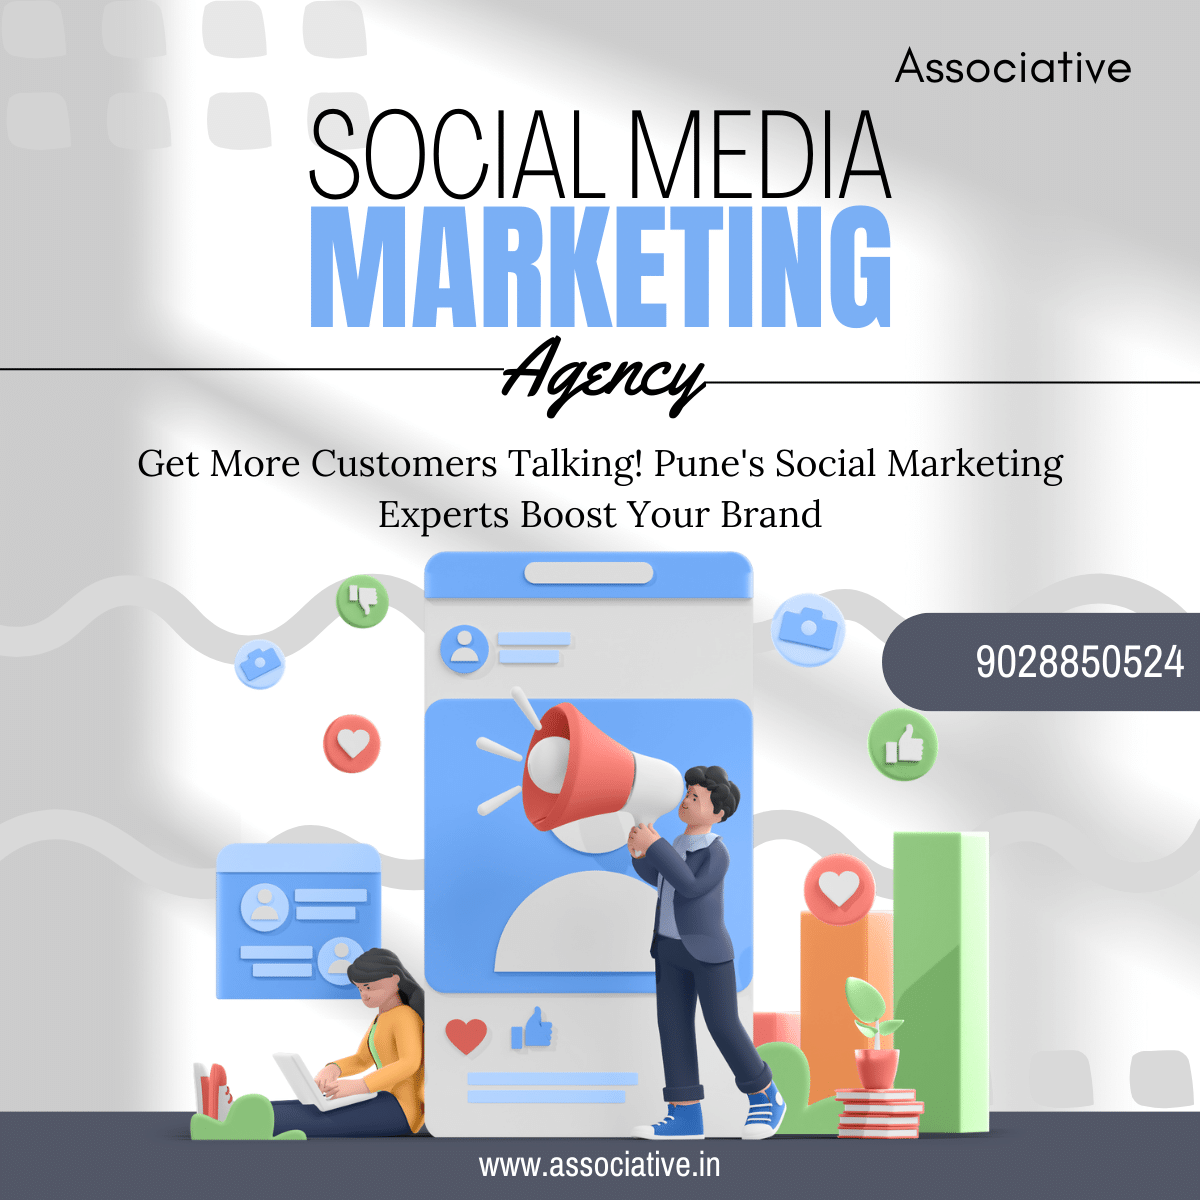 Get More Customers Talking! Pune's Social Marketing Experts Boost Your Brand